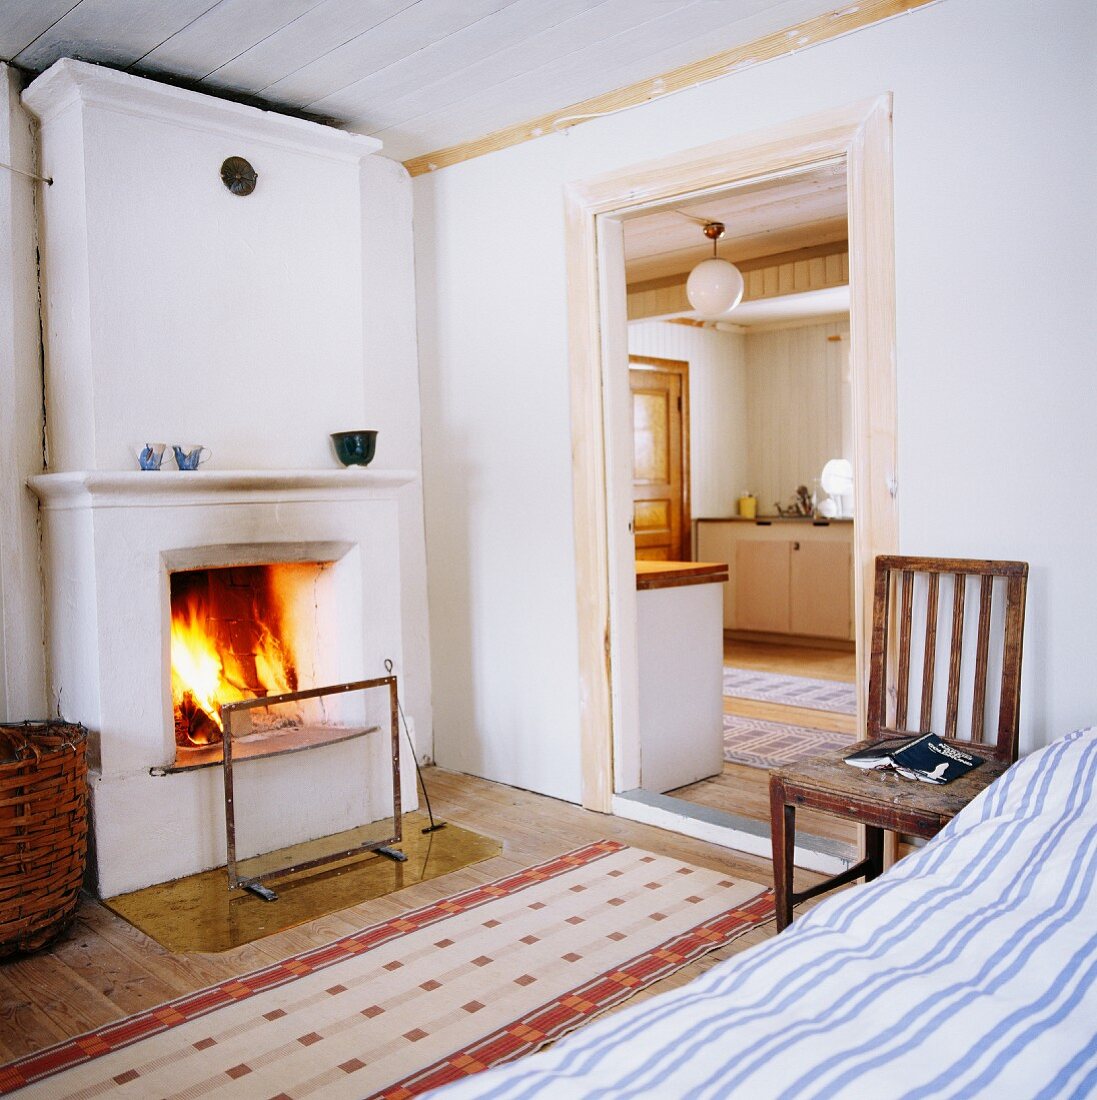 A bedroom with an open fireplace, Sweden